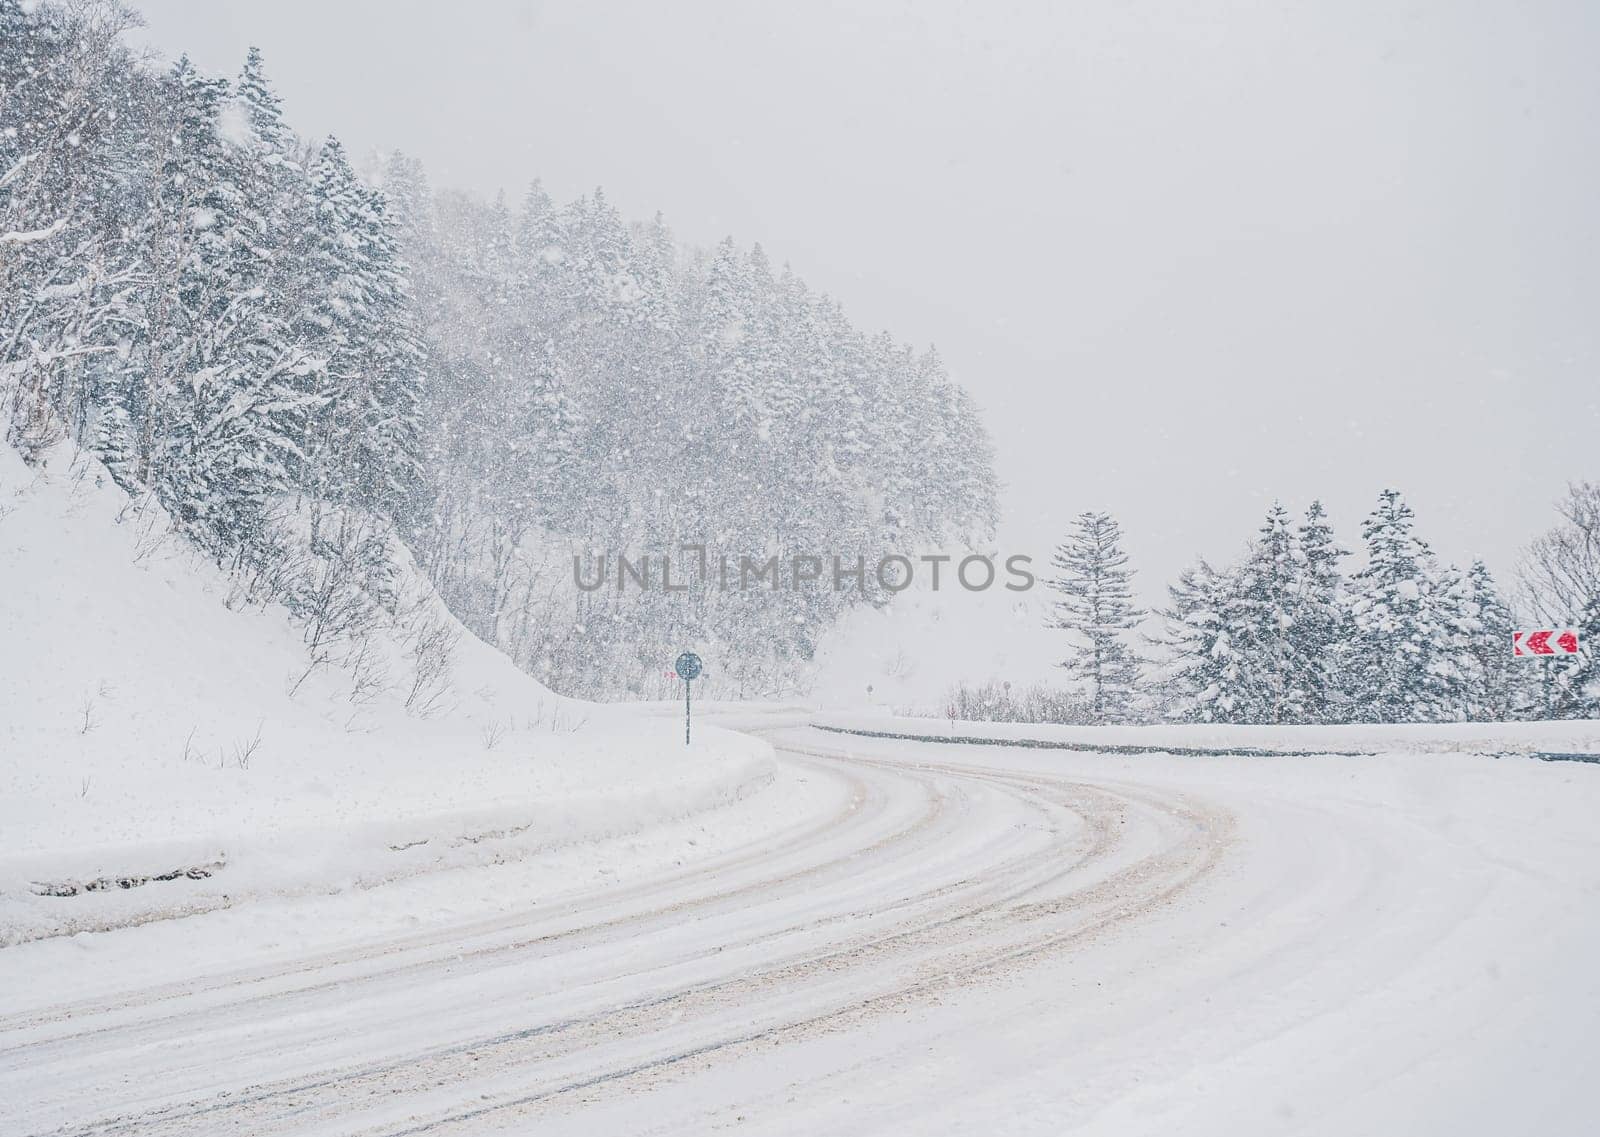 Snow is heavily falling on a winding mountain road lined with dense forest. The road appears slippery due to the accumulating snow.